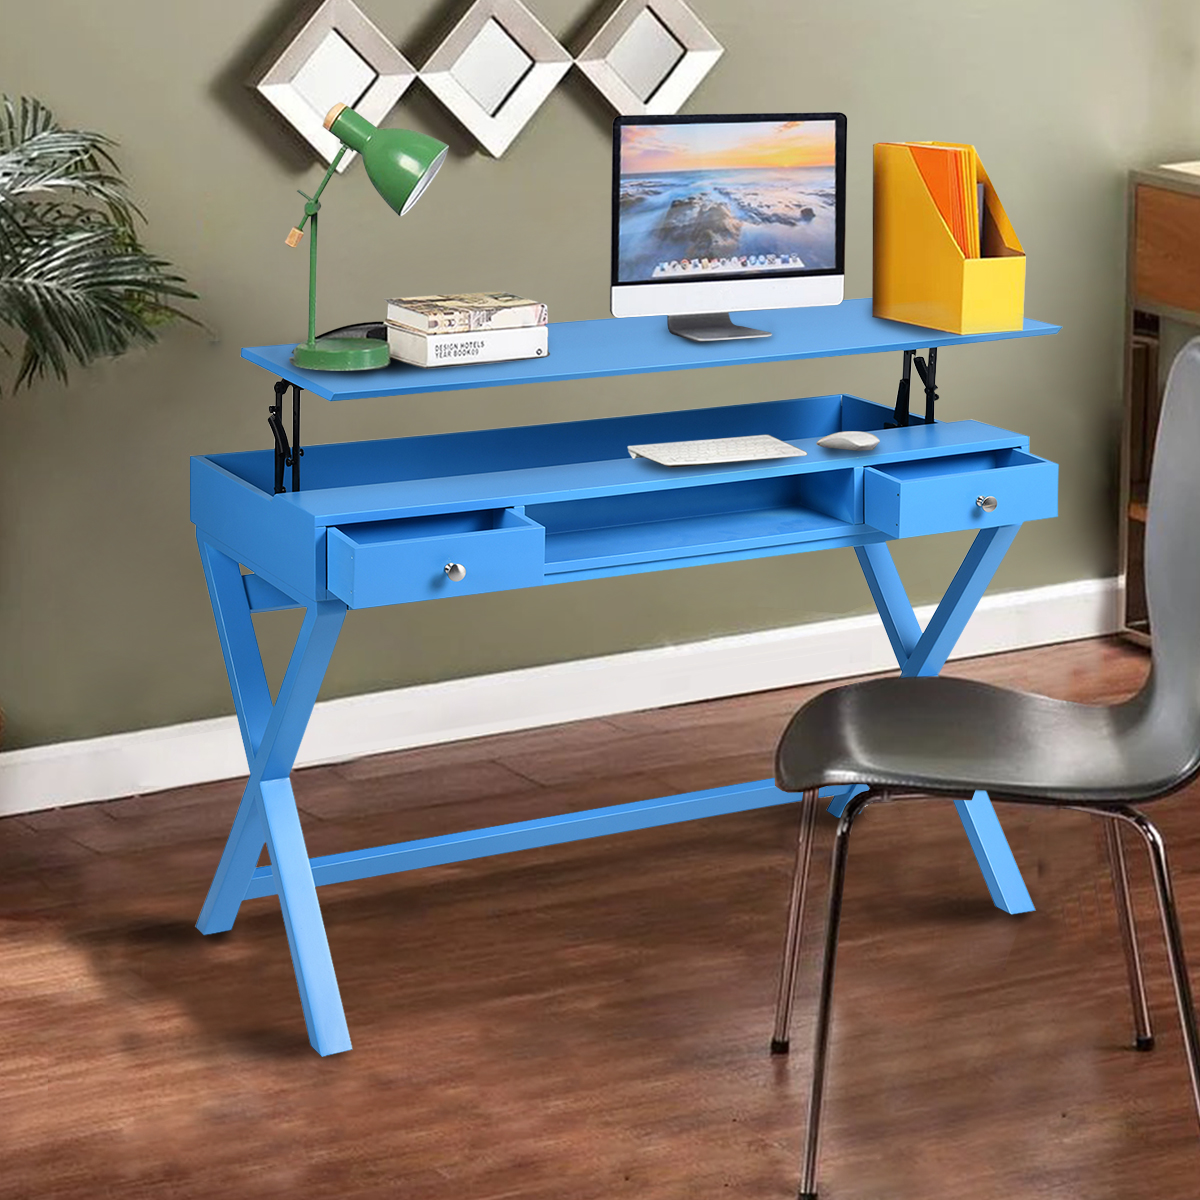 Lift Desk with 2 Drawer Storage, Computer Desk with Lift Table Top, Adjustable Height Table for Home Office, Living Room,BLUE